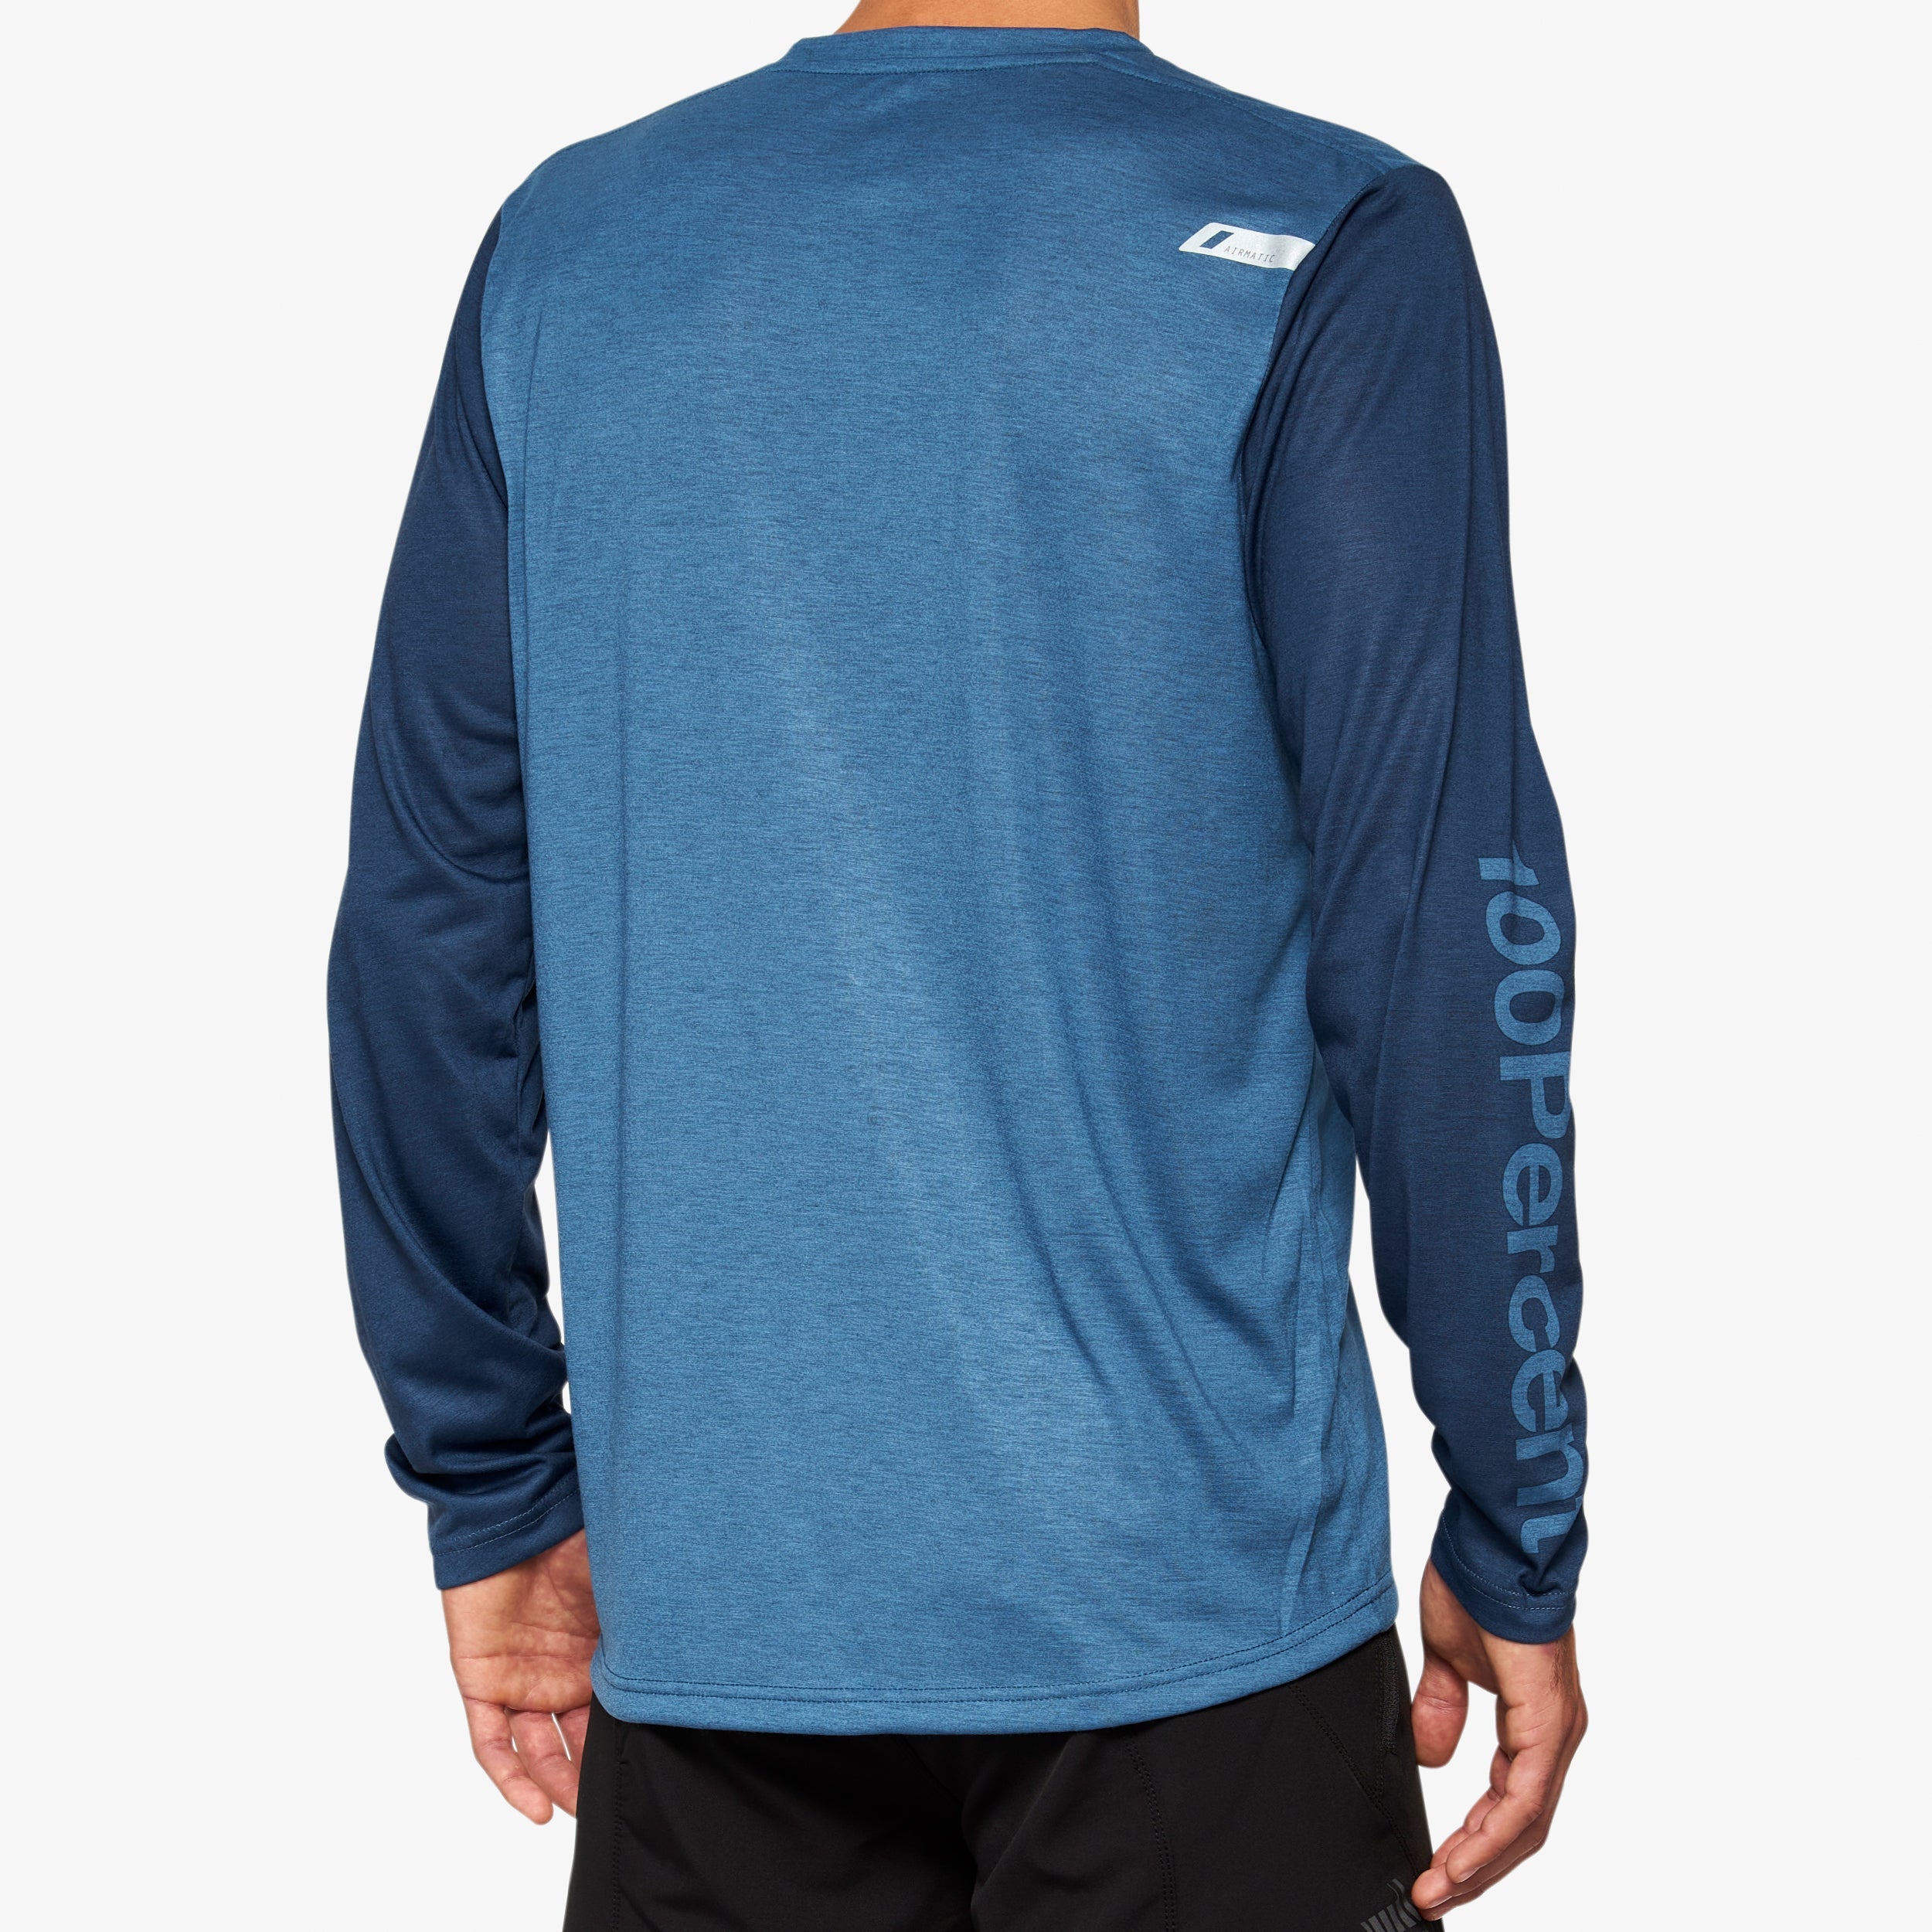 AIRMATIC Long Sleeve Jersey Slate Blue - Secondary